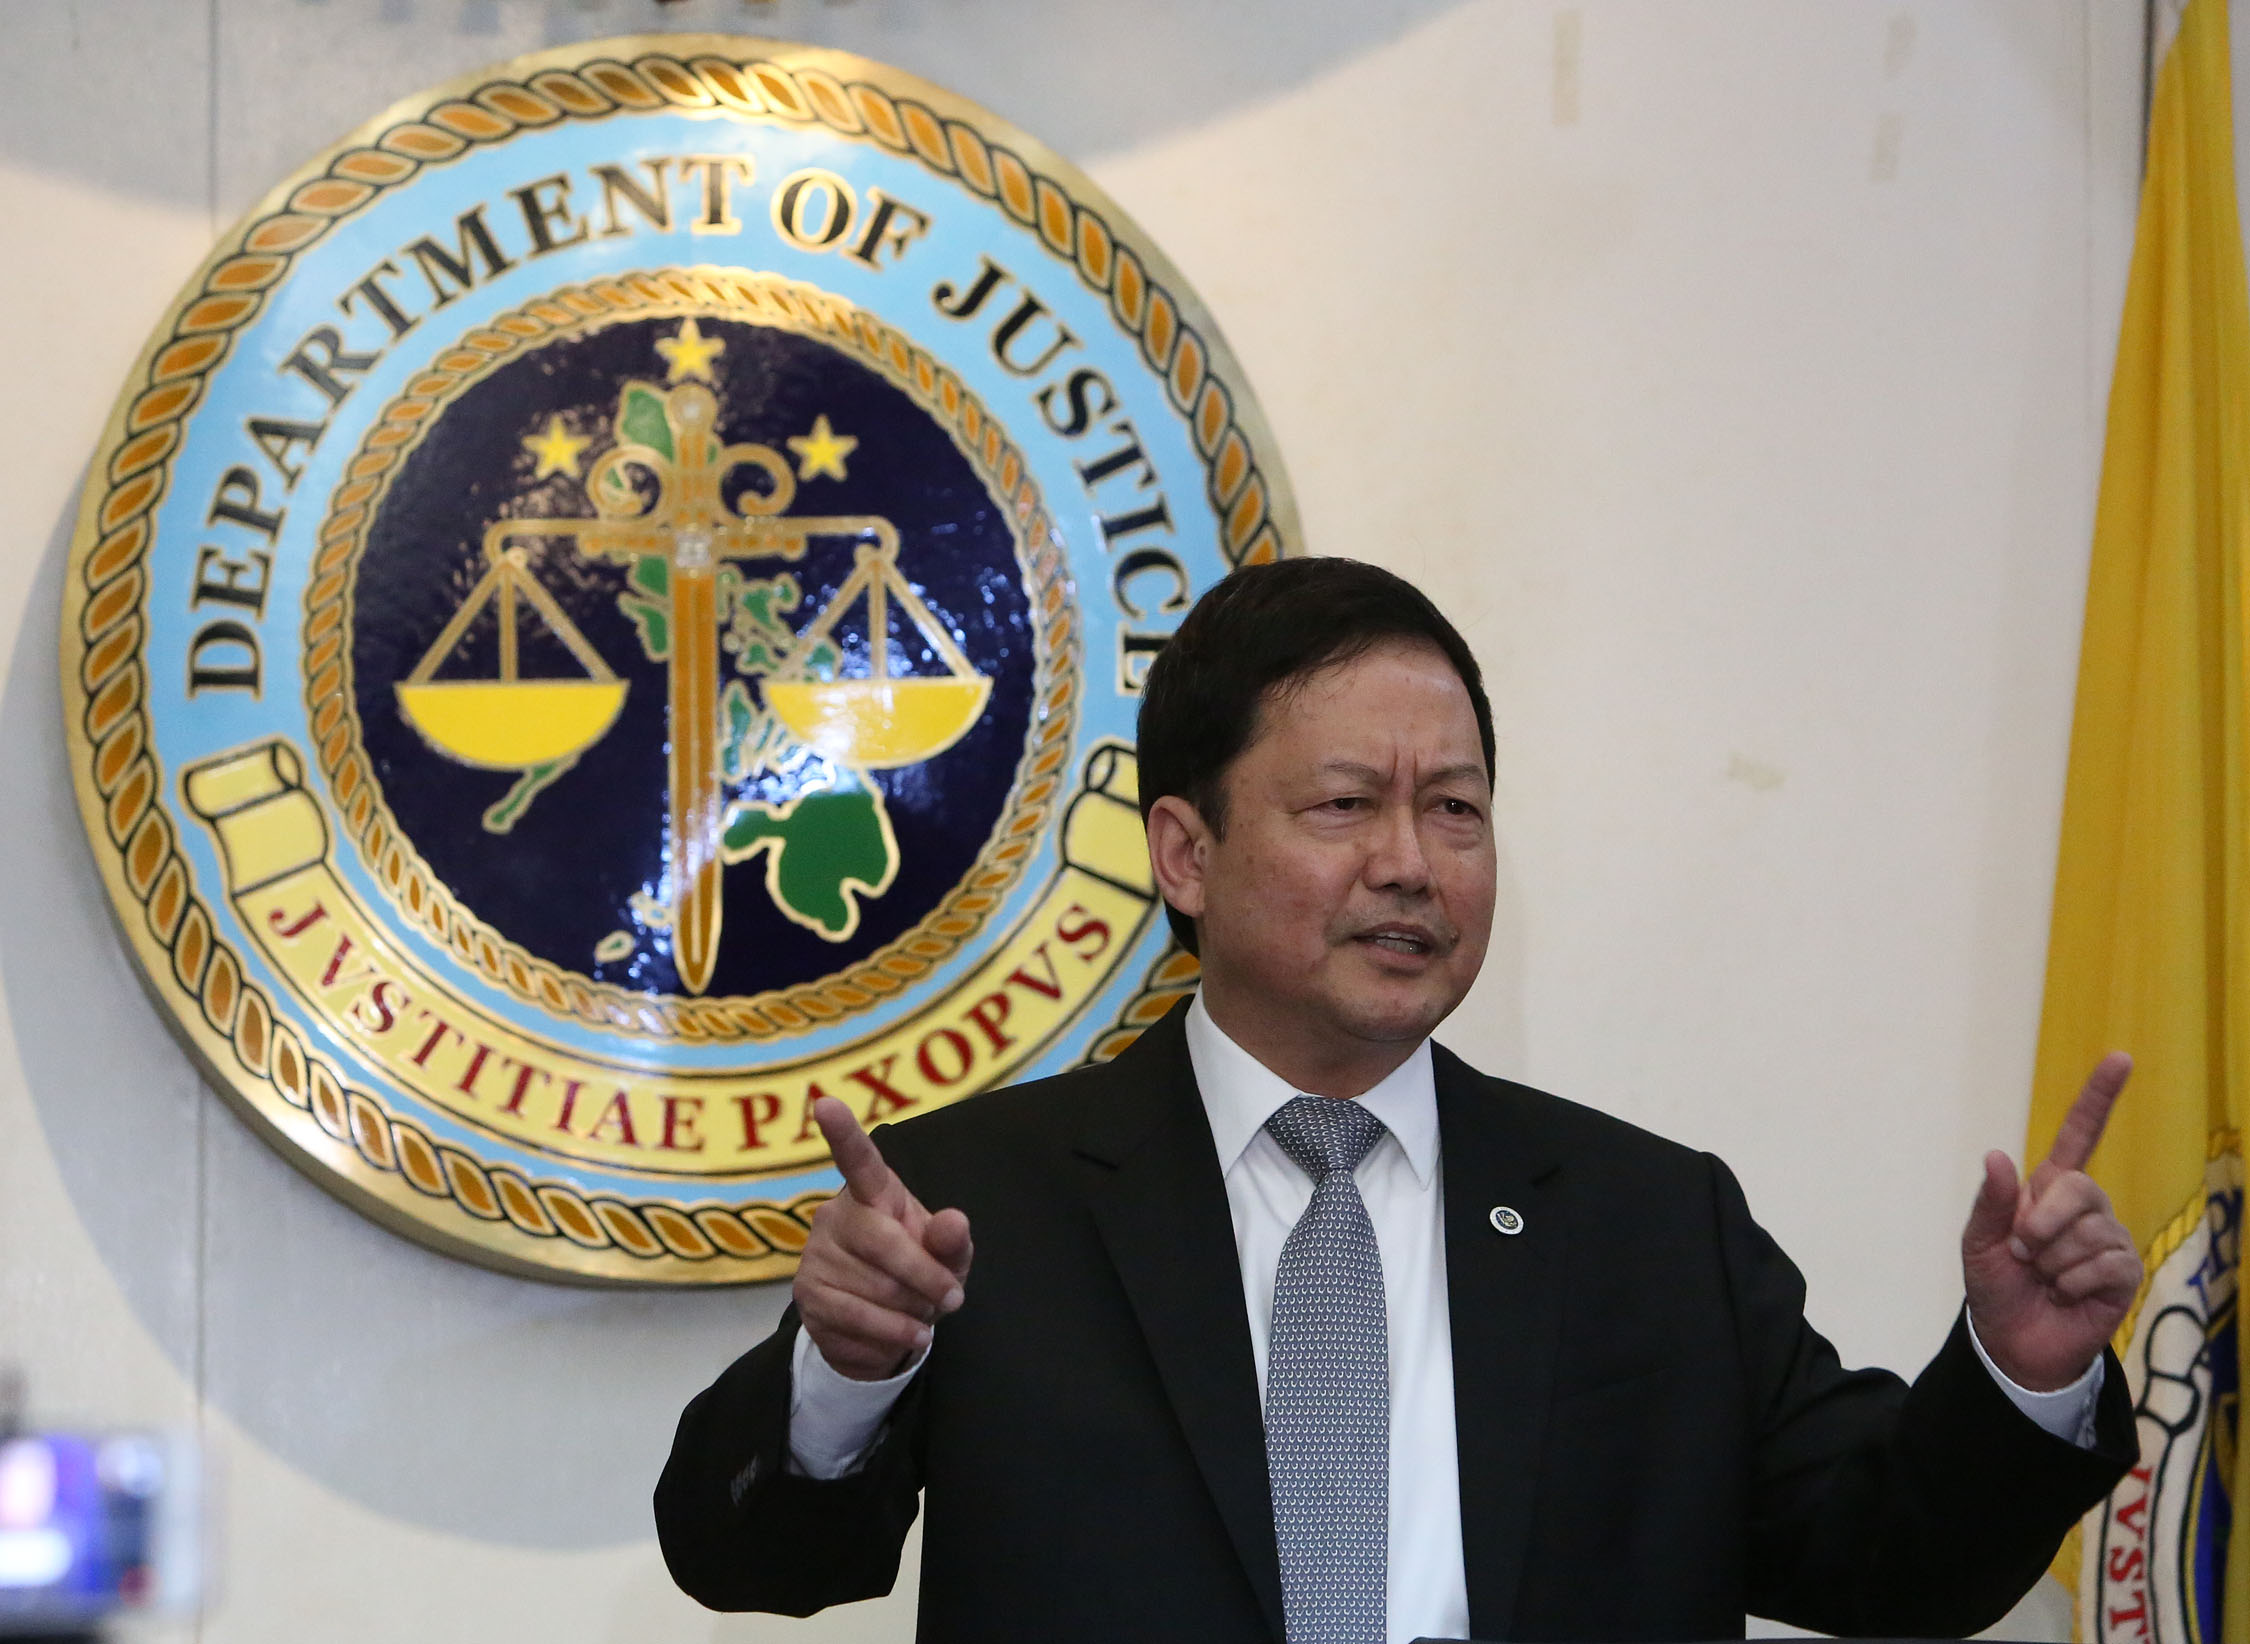 DOJ: Palace ‘absolutely nothing to do’ with arrest of ‘person of interest’ in ‘Bikoy’ videos